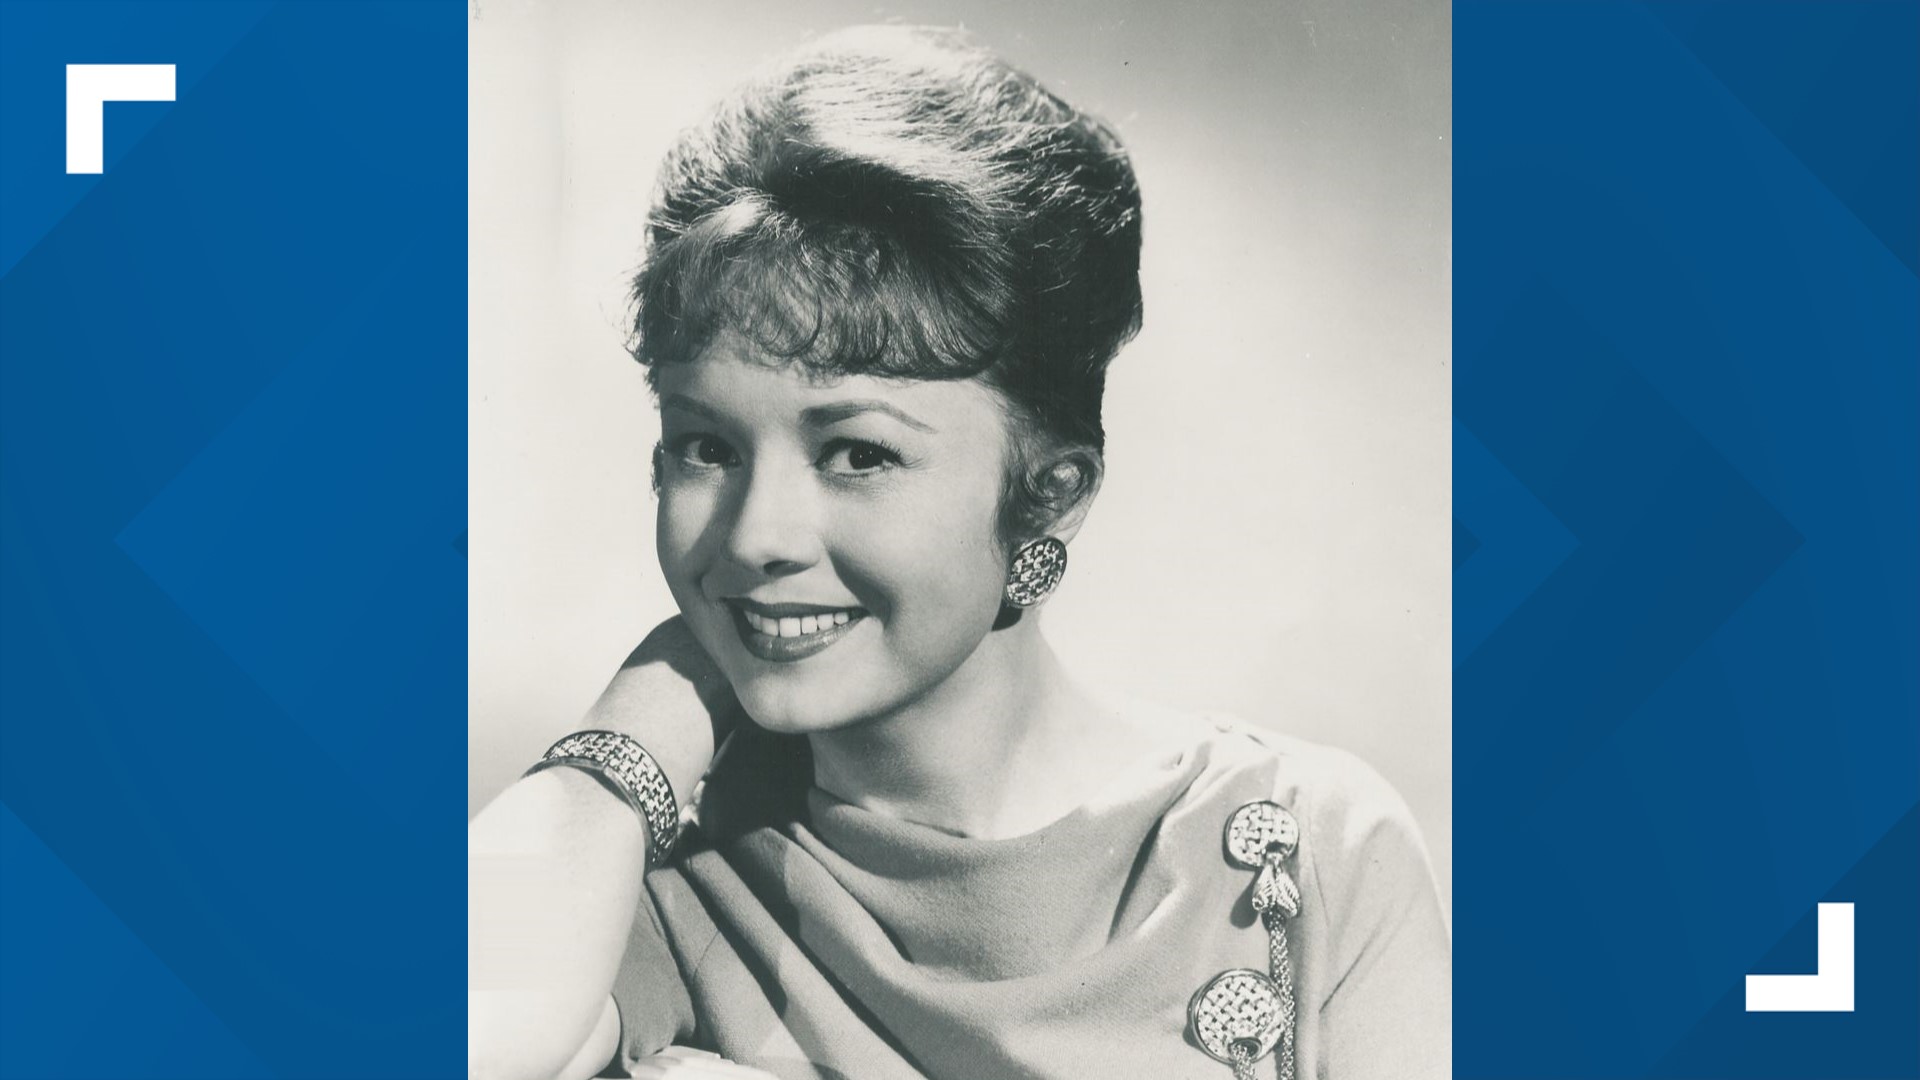 Betty Lynn appeared in 26 episodes of the Andy Griffith Show with 25 appearances before the departure of Don Knotts, according to CBS affiliate WYMT.